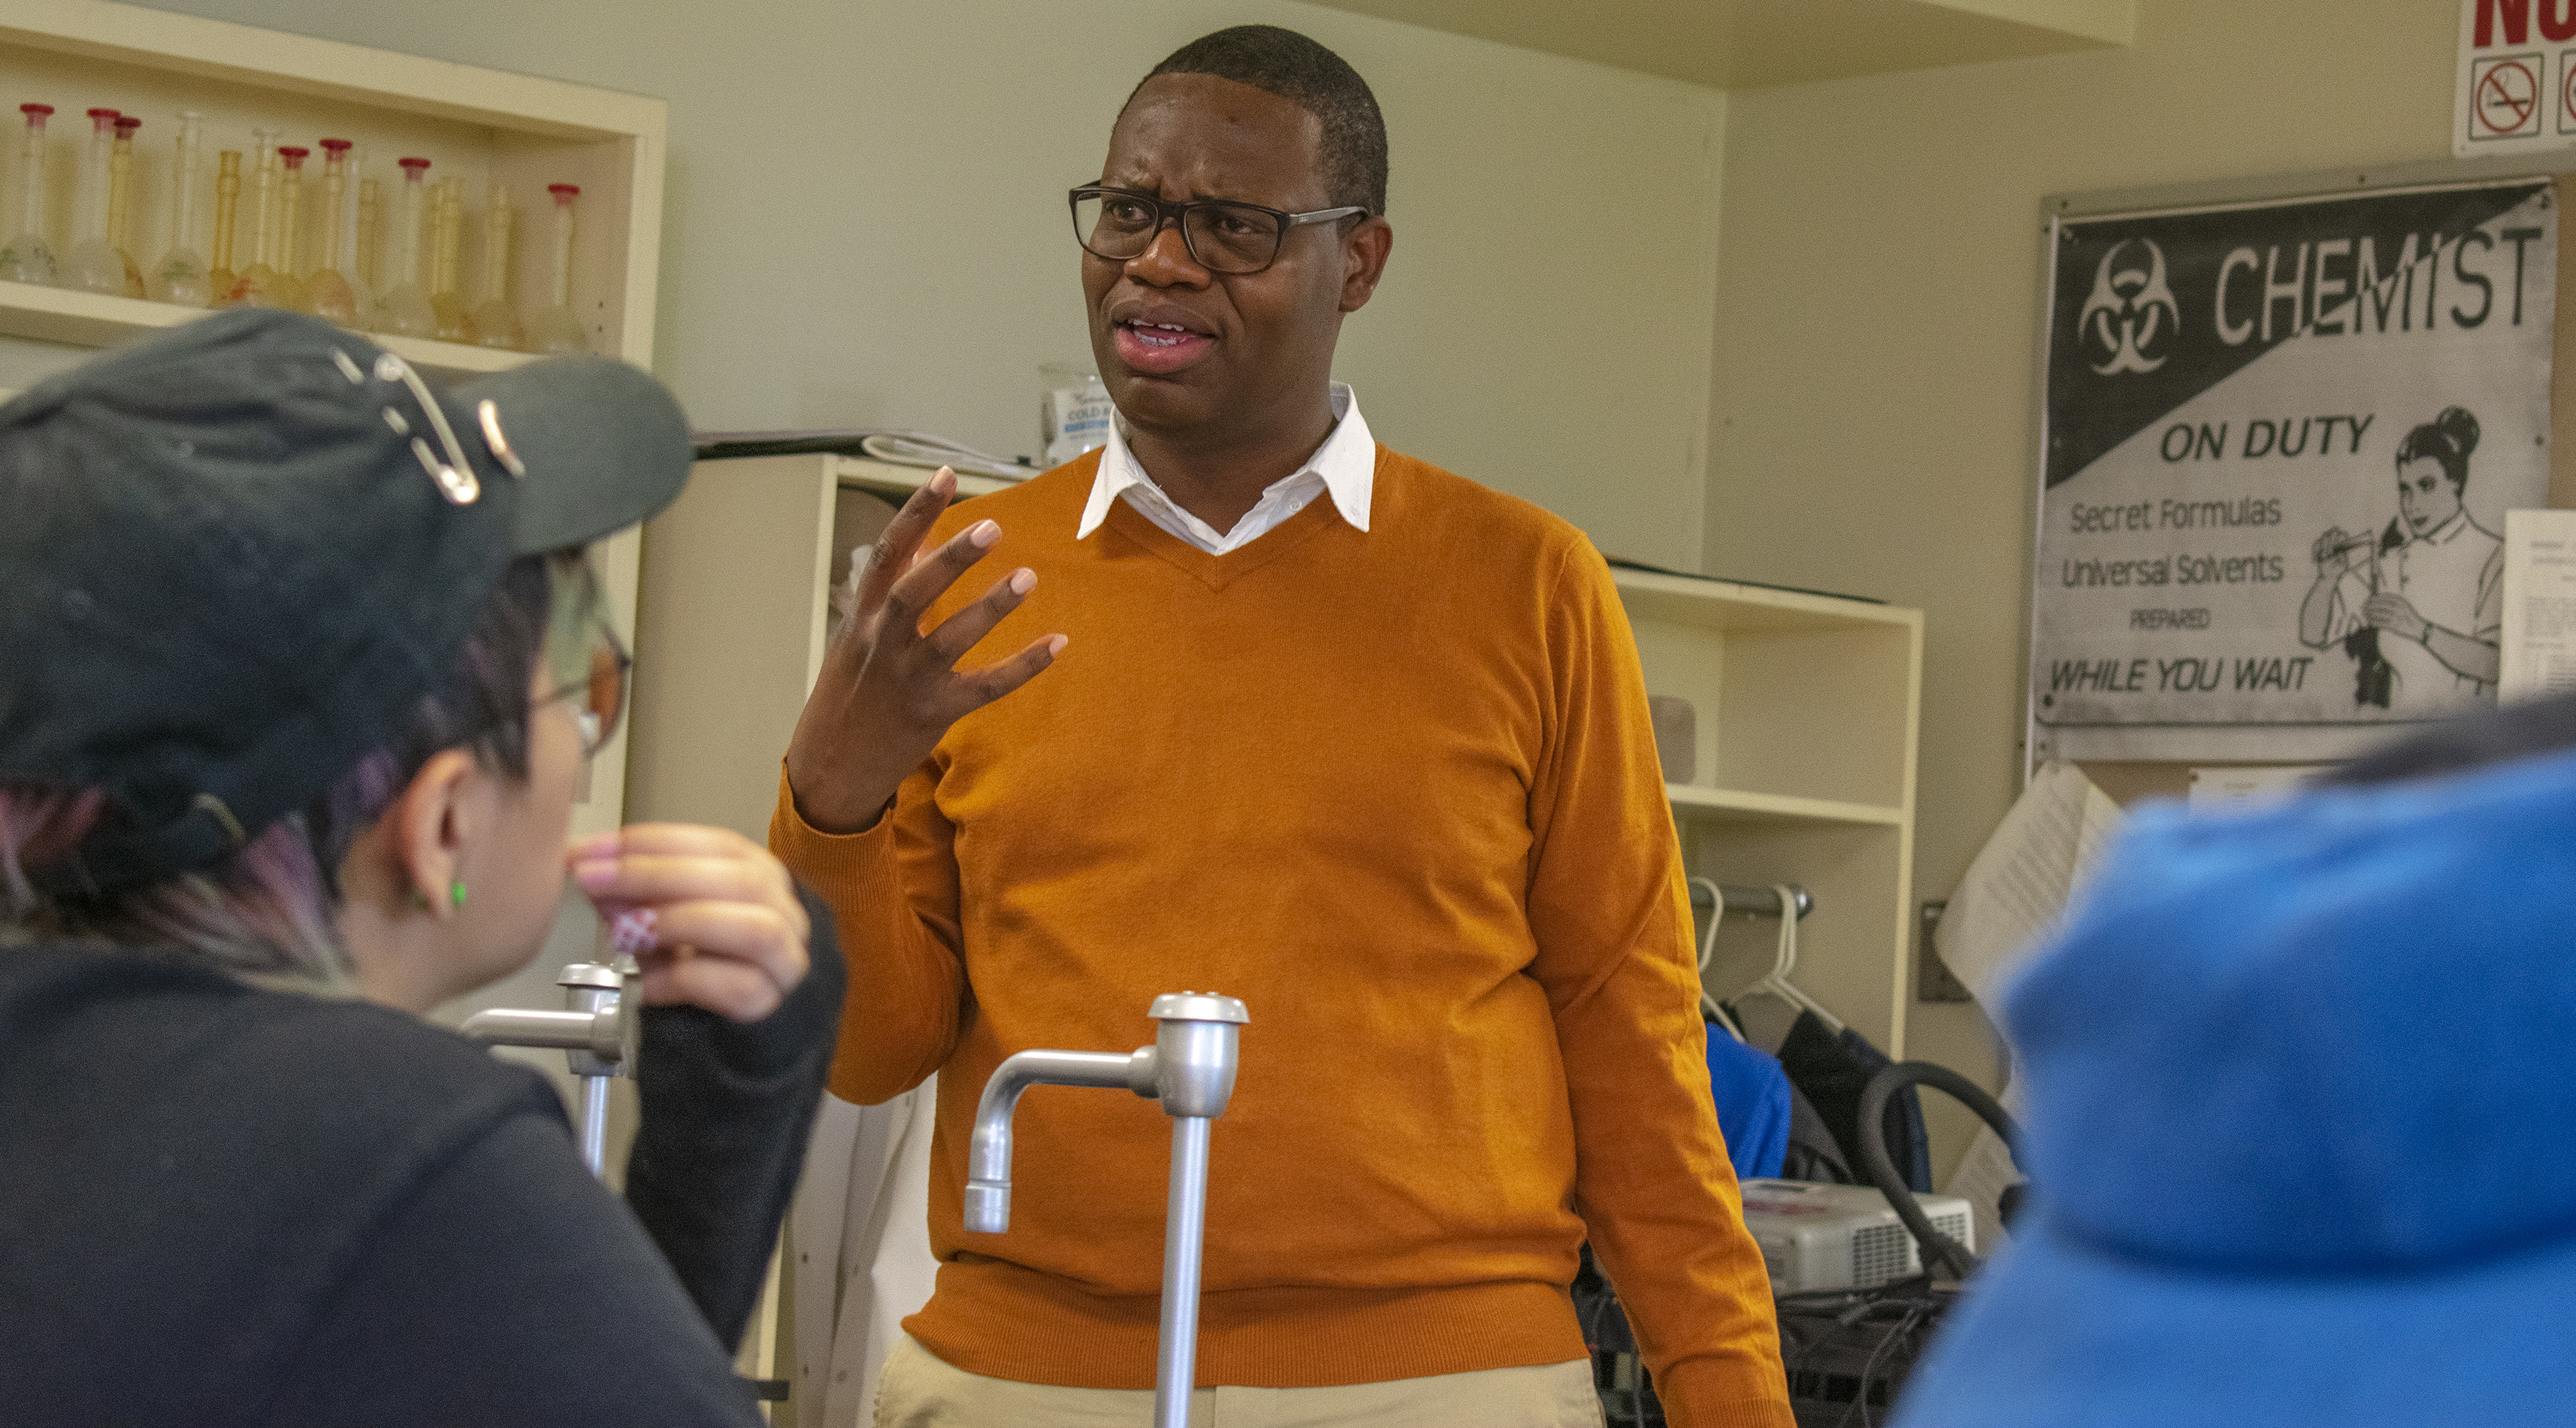 City College Chemistry Professor Devoun Stewart provides insight to the classroom about not giving up when trying to solve chemistry equations in Lillard Hall room 206 Tuesday, Oct. 15, 2019. (Denzell Washington/denzell.express@gmail.com)